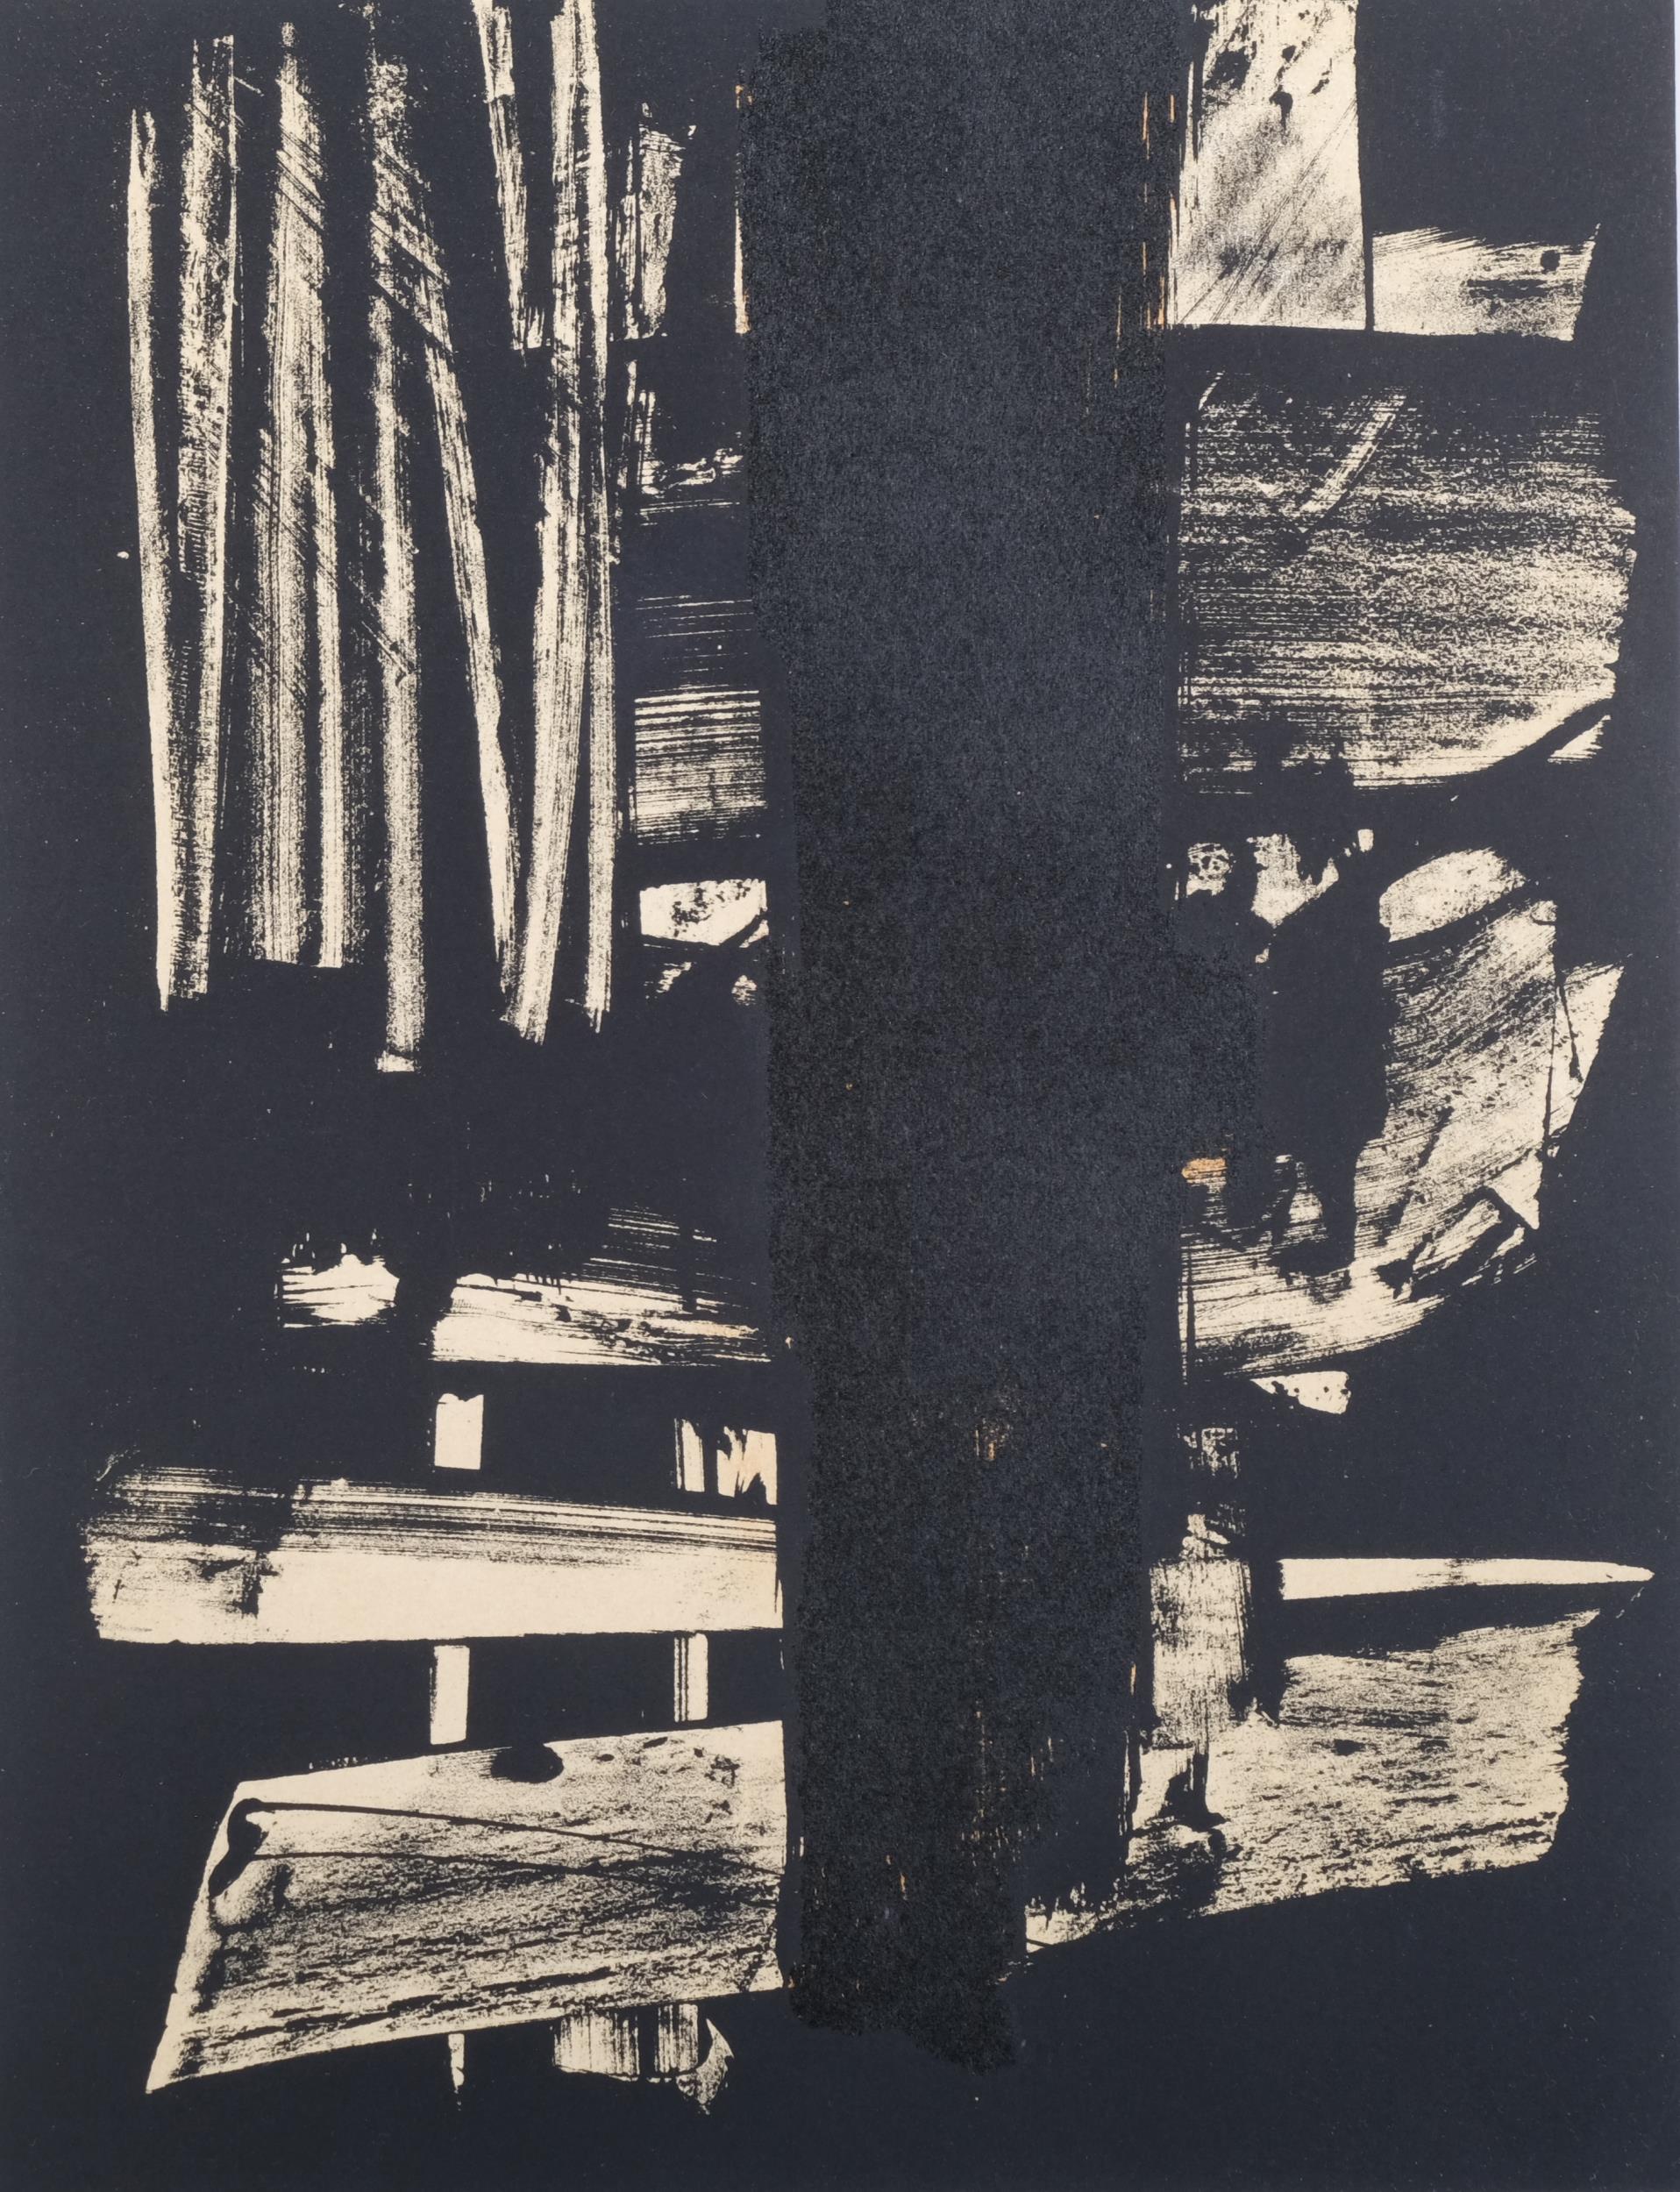 Pierre Soulages, abstract, lithograph no. 9, issued XX Siecle 1959, 30cm x 23cm, framed Good